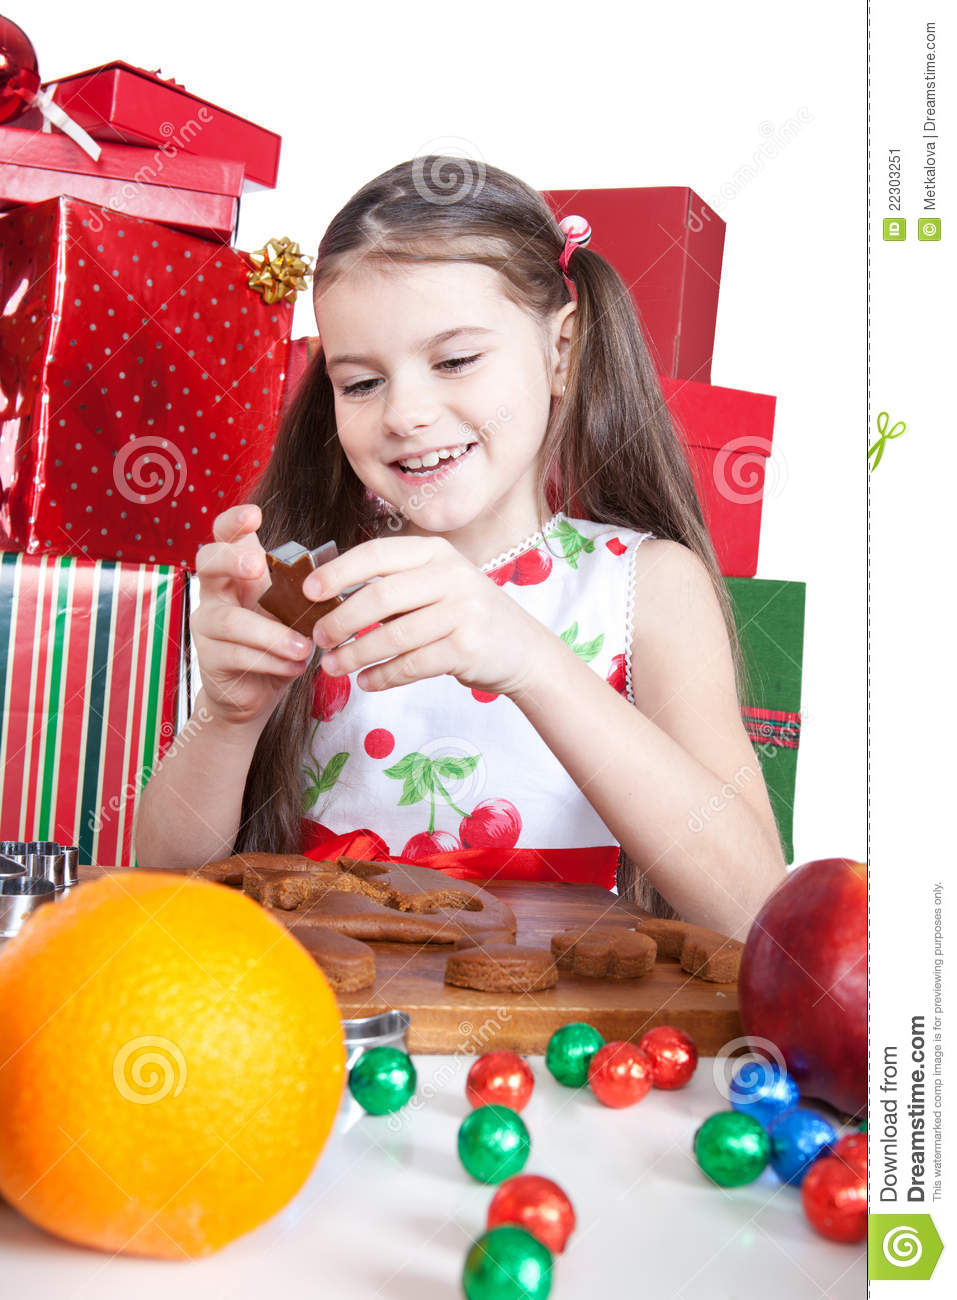 Cute Little Girl Making Christmas Cookies At A Table 